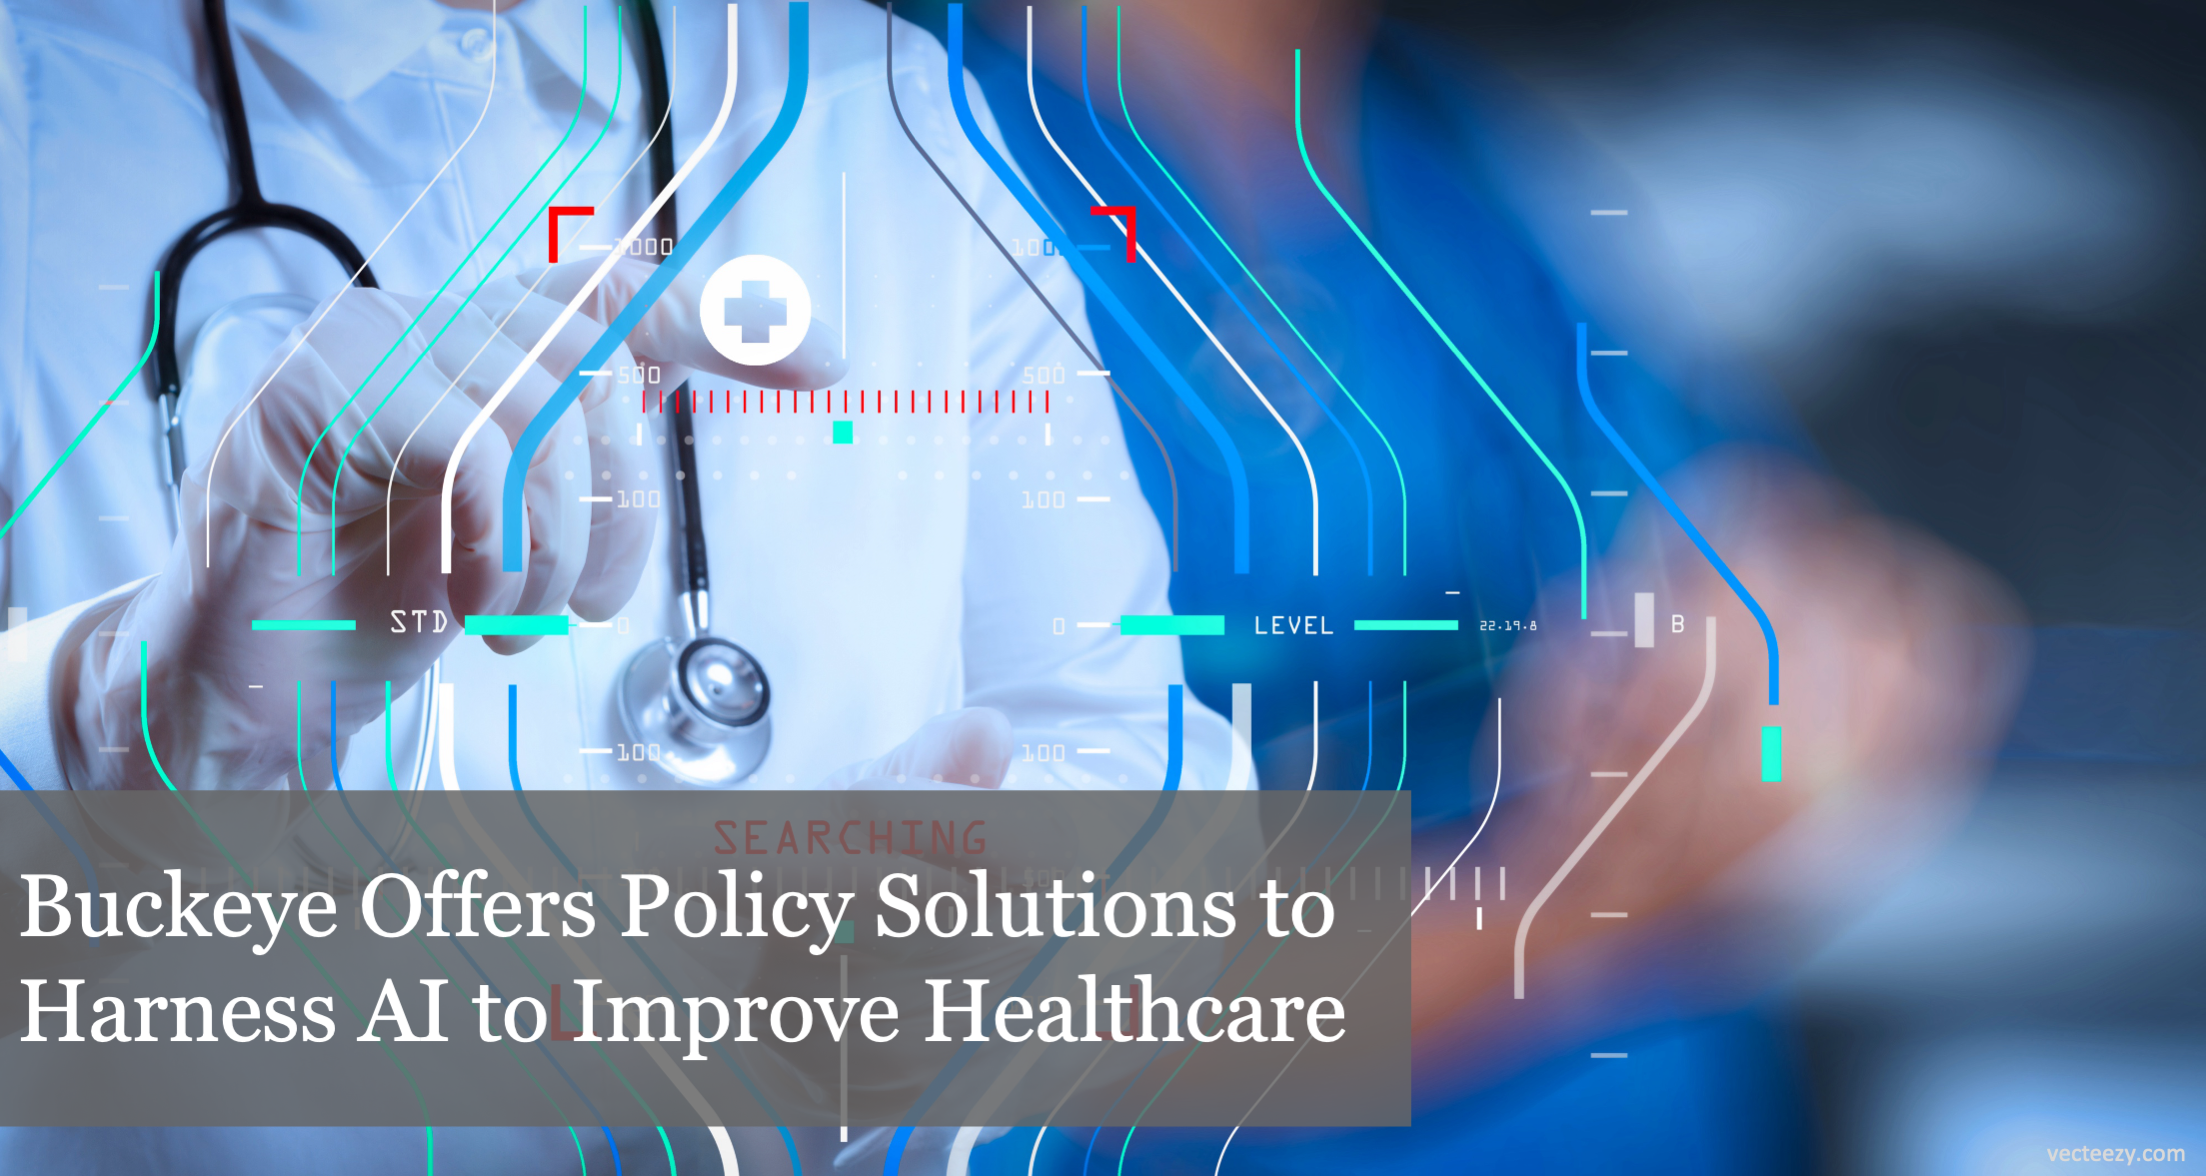 The Buckeye Institute Offers Policy Solutions to Harness AI to Improve Healthcare